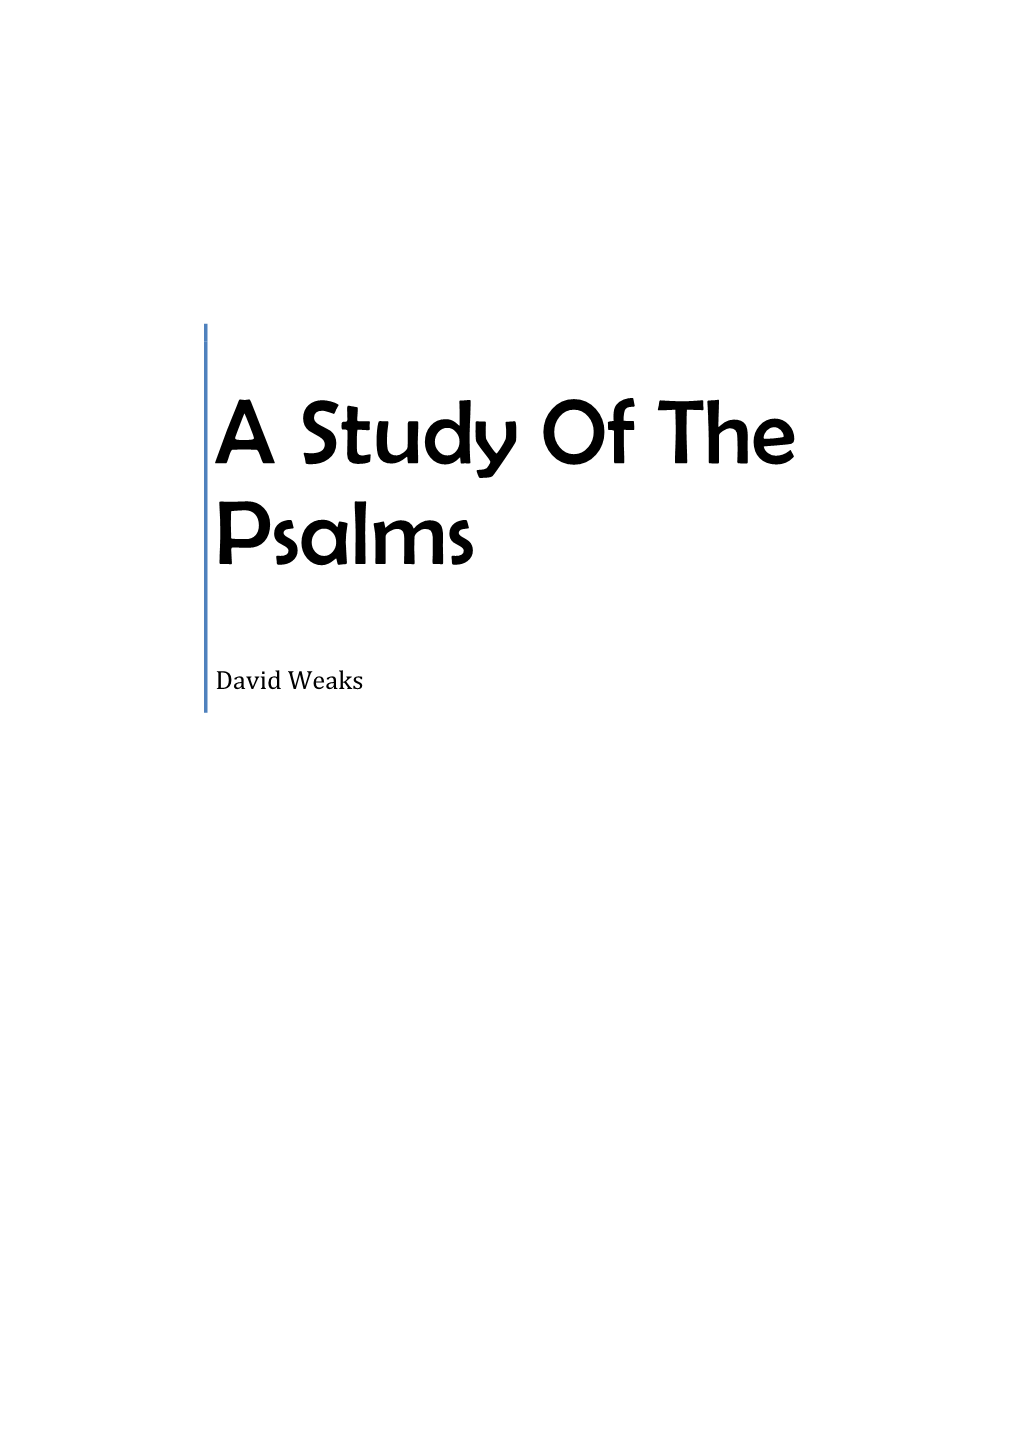 A Study of Psalms Lesson 1